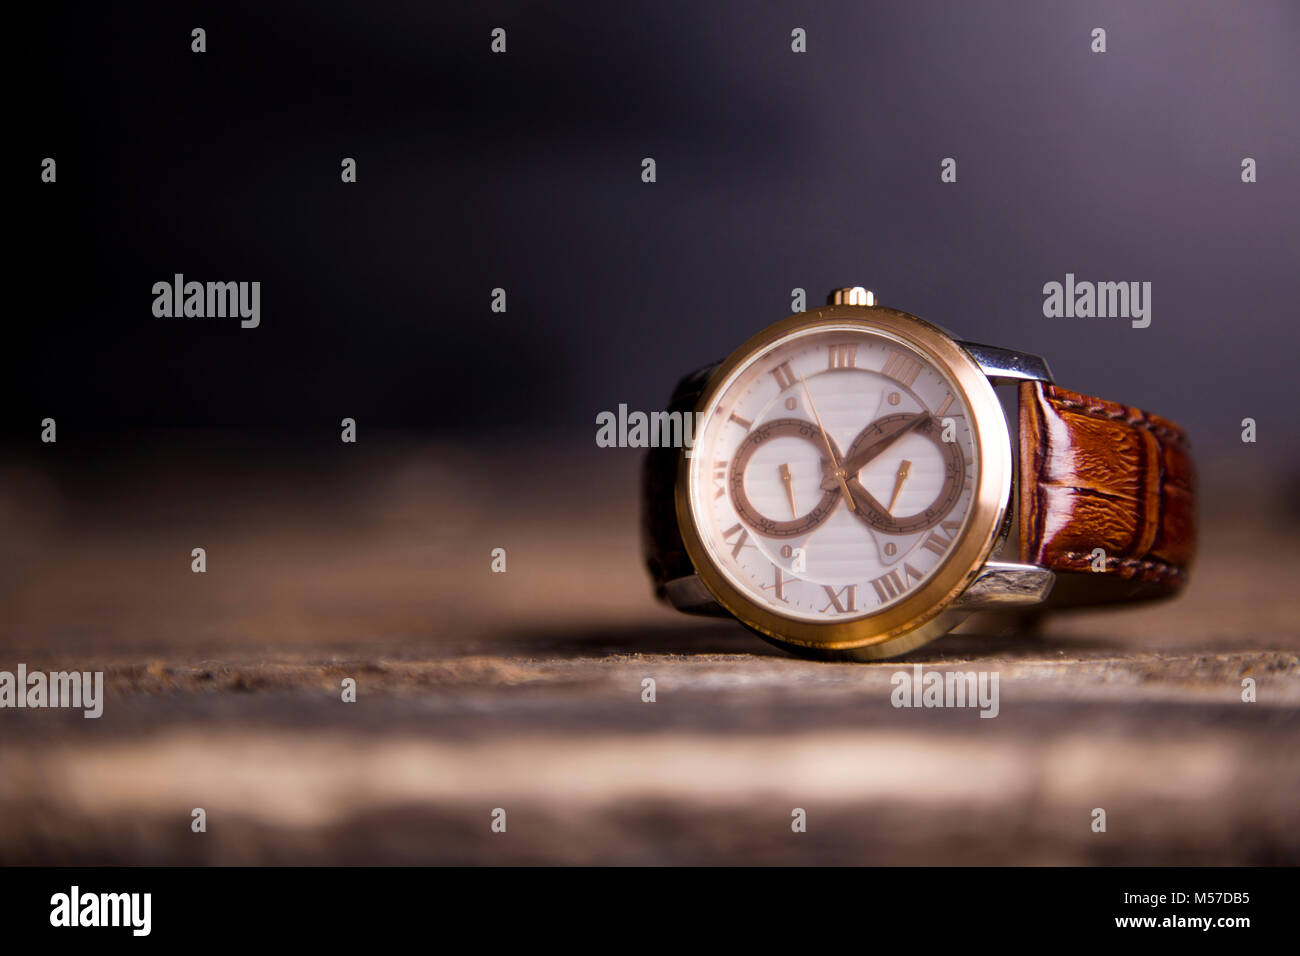 Brown  LEATHER WATCH, VINTAGE STYLE WRIST WATCH, MEN'S LEATHER WATCH on wooden background blur. Stock Photo